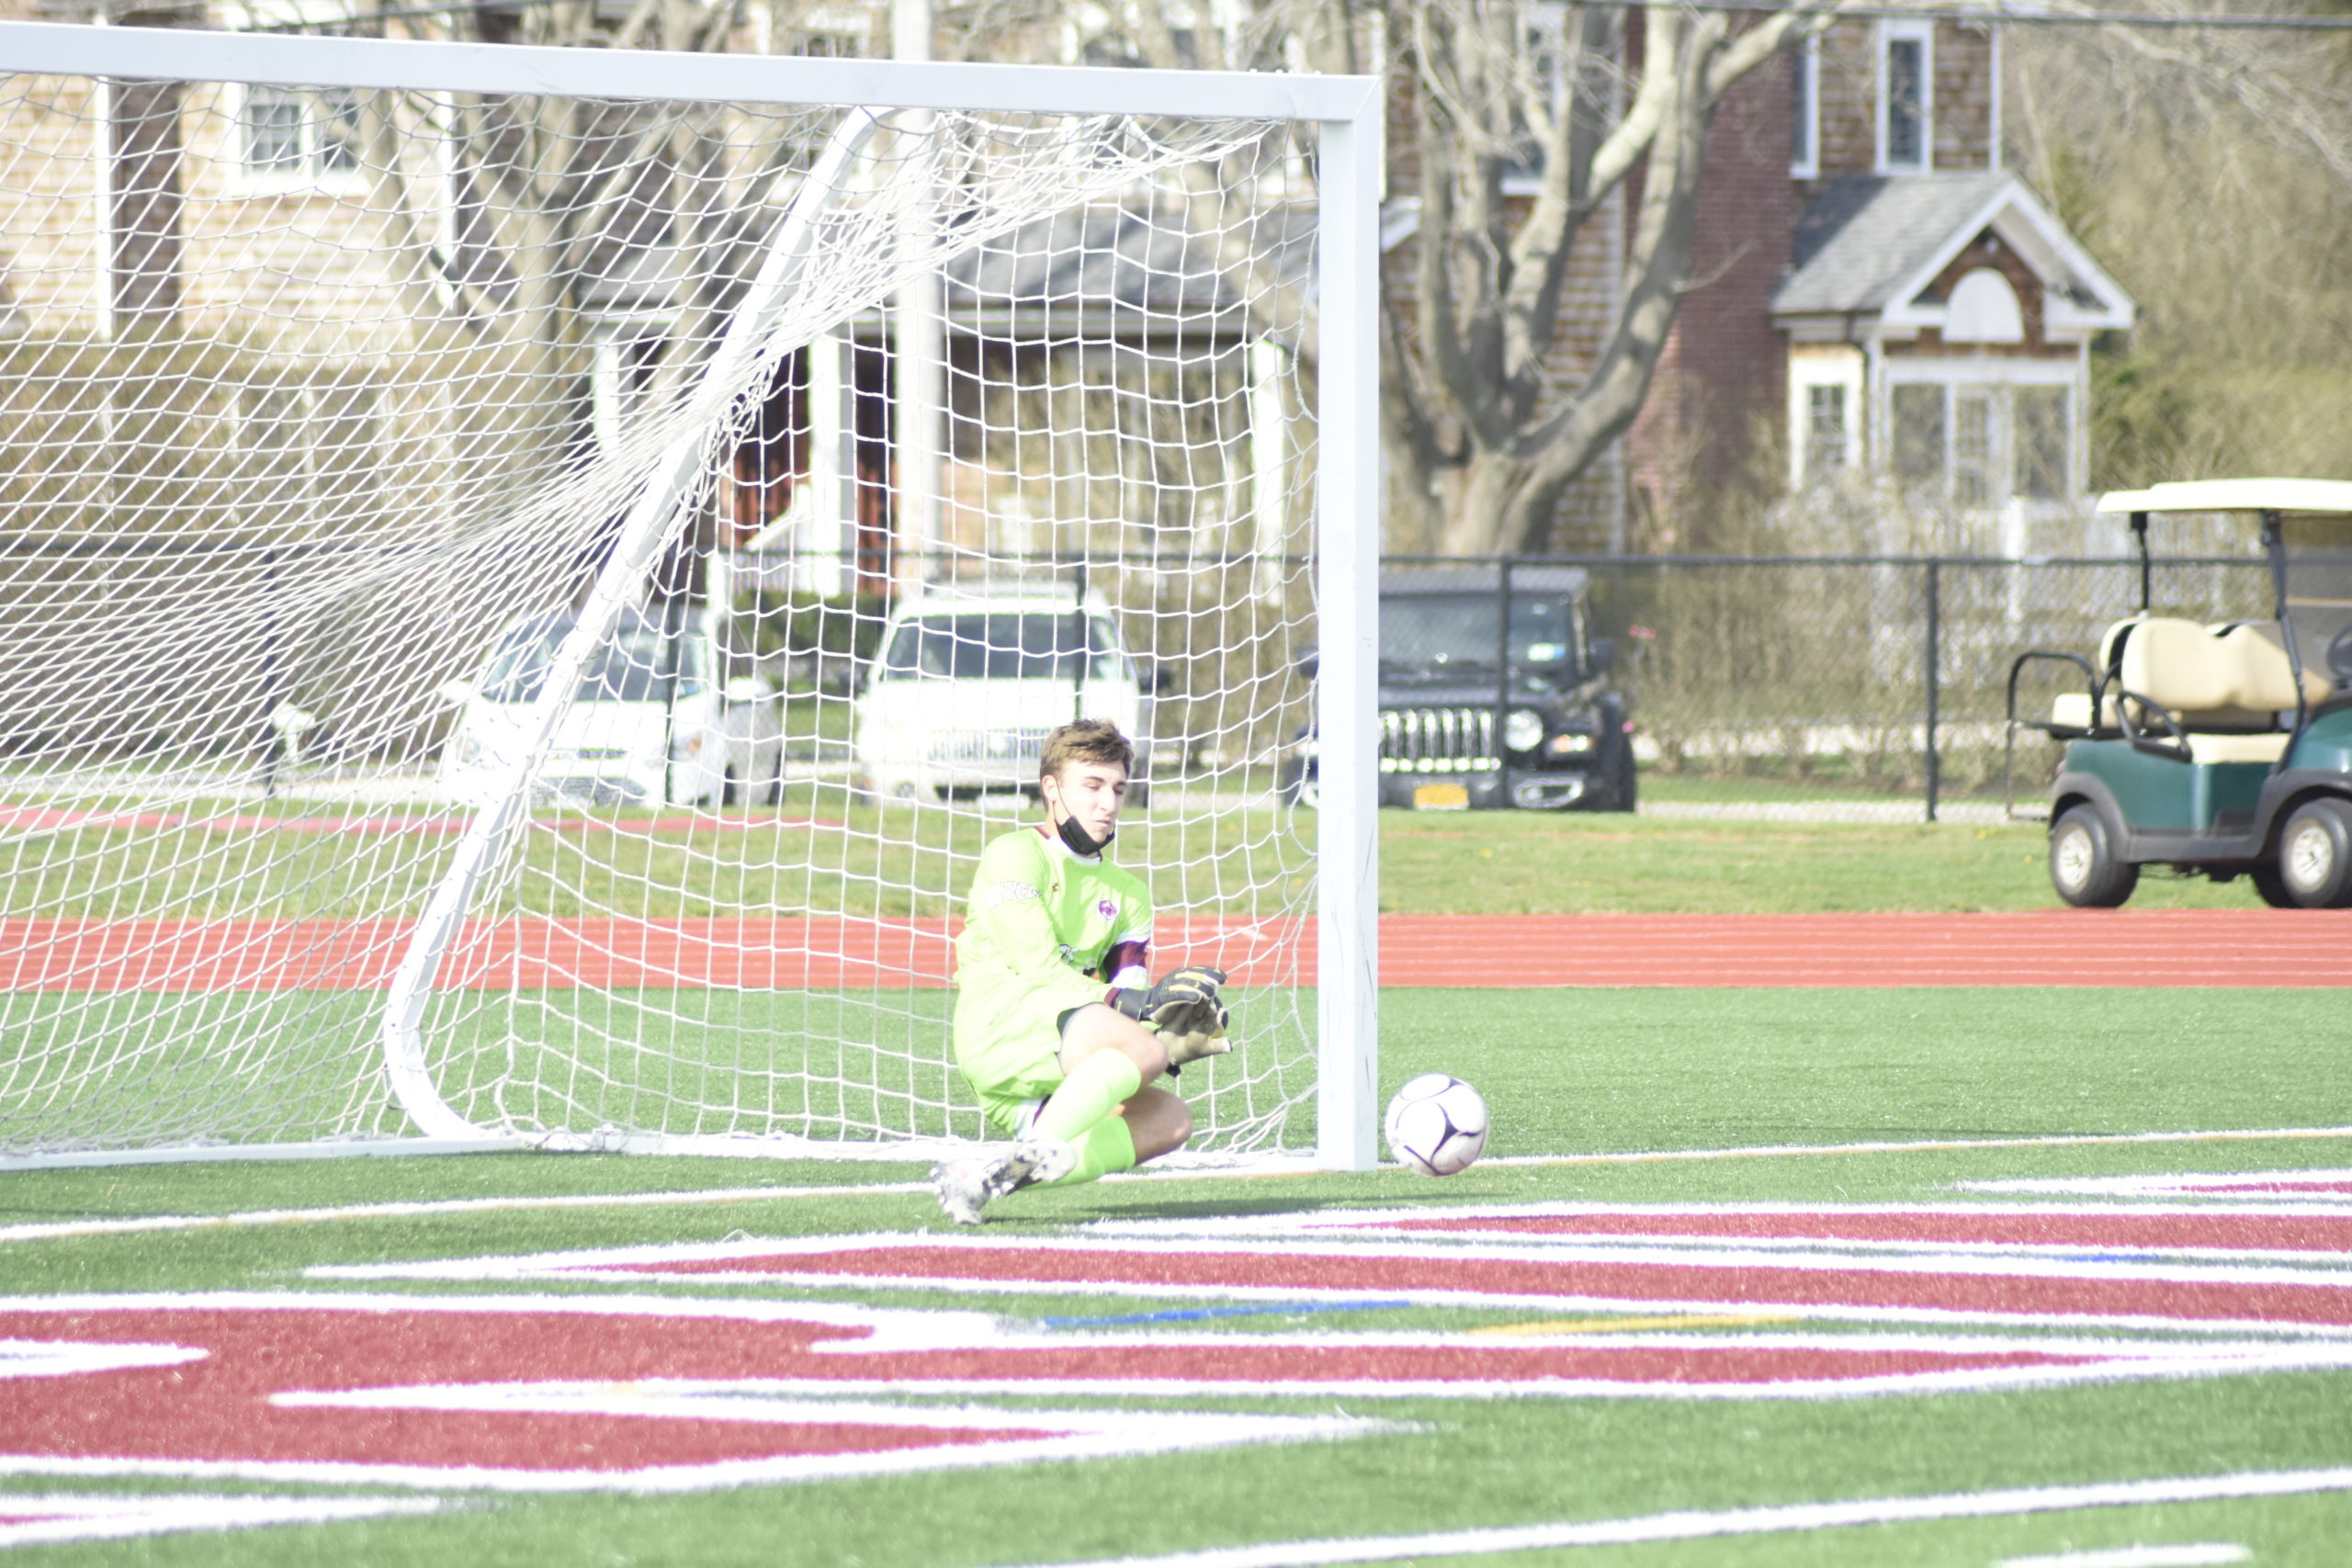 Southampton sophomore goalie Andrew Panza makes a save on a penalty kick early in the first half of Wednesday's game.